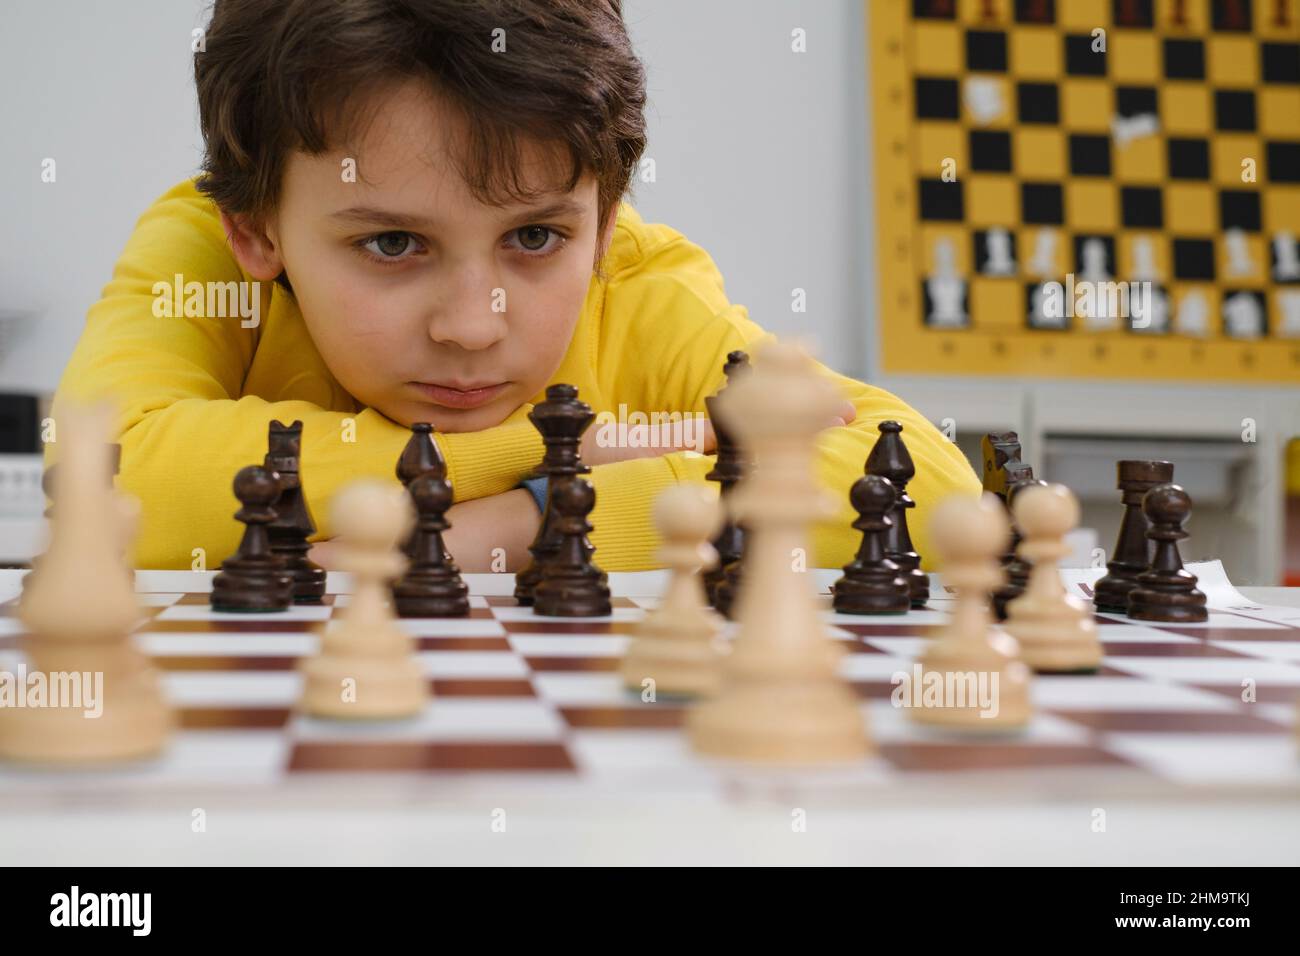 Caucasian boy playing chess. Happy concentrated child behind chess in class or school lesson. Excited clever elementary school kid with board game Stock Photo